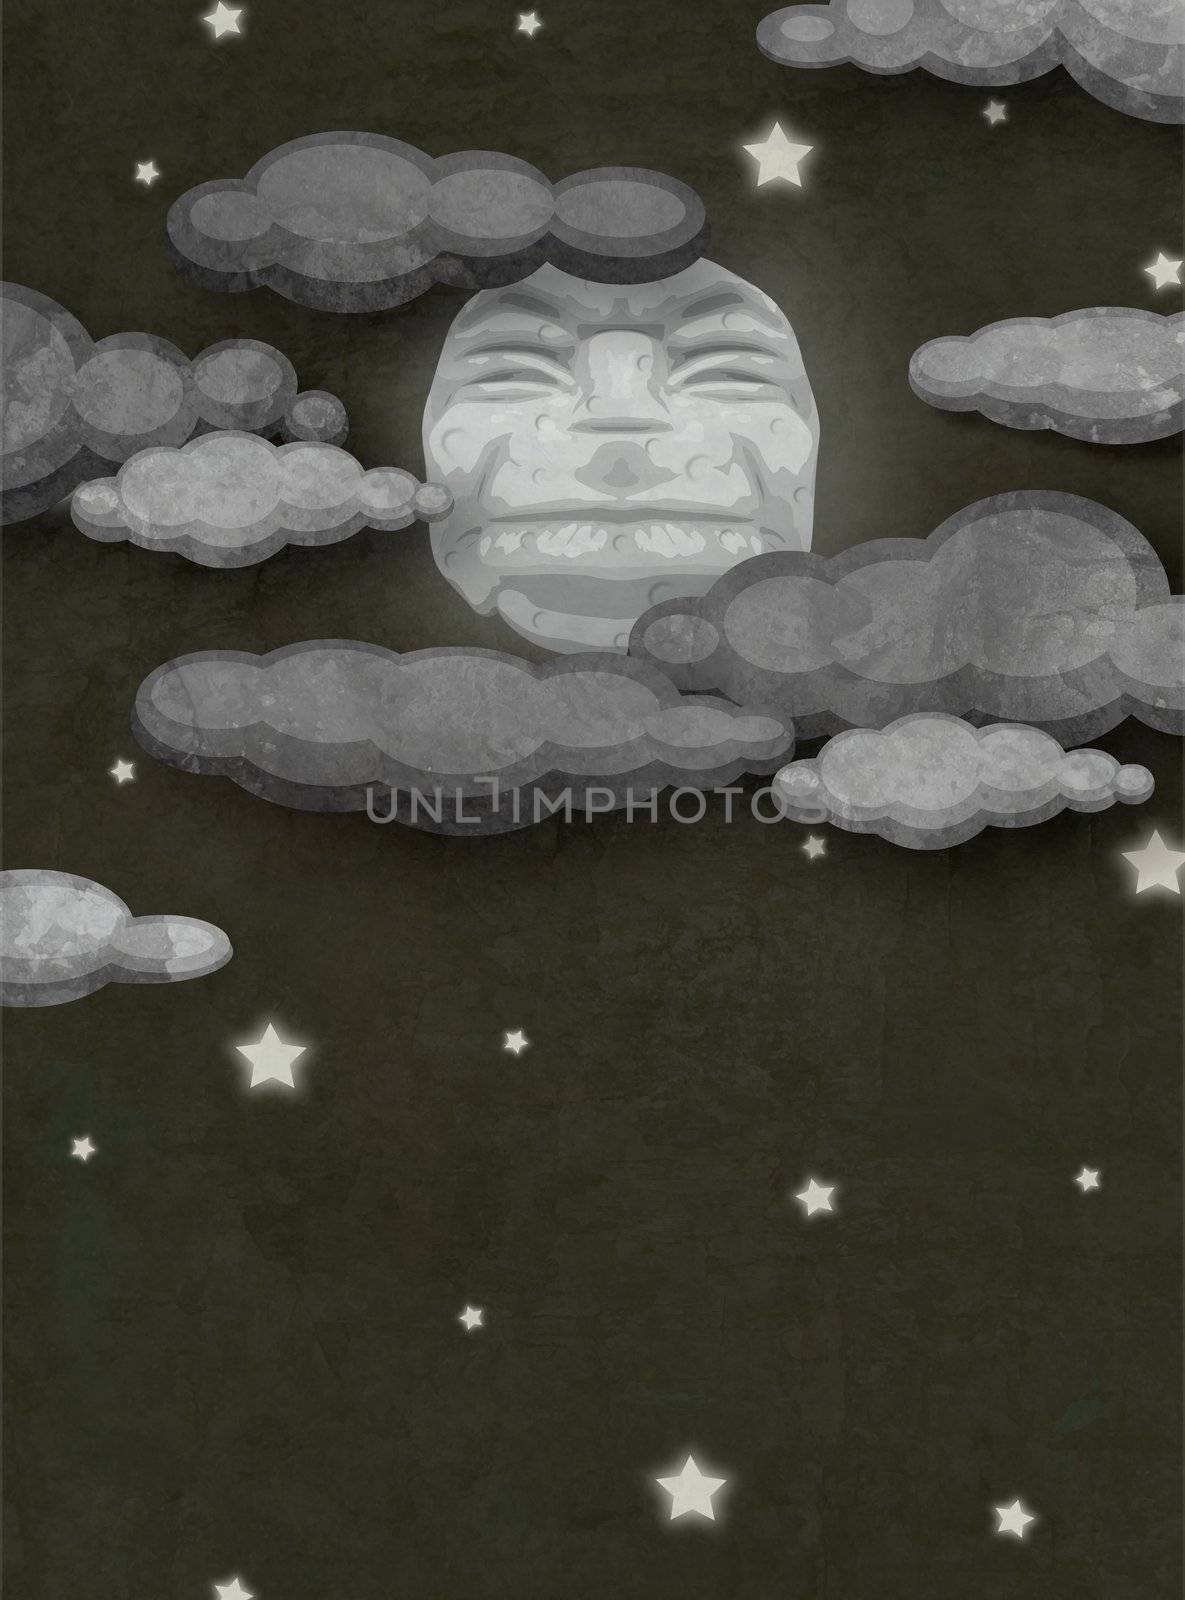 Illustration of a vintage looking moon with clouds